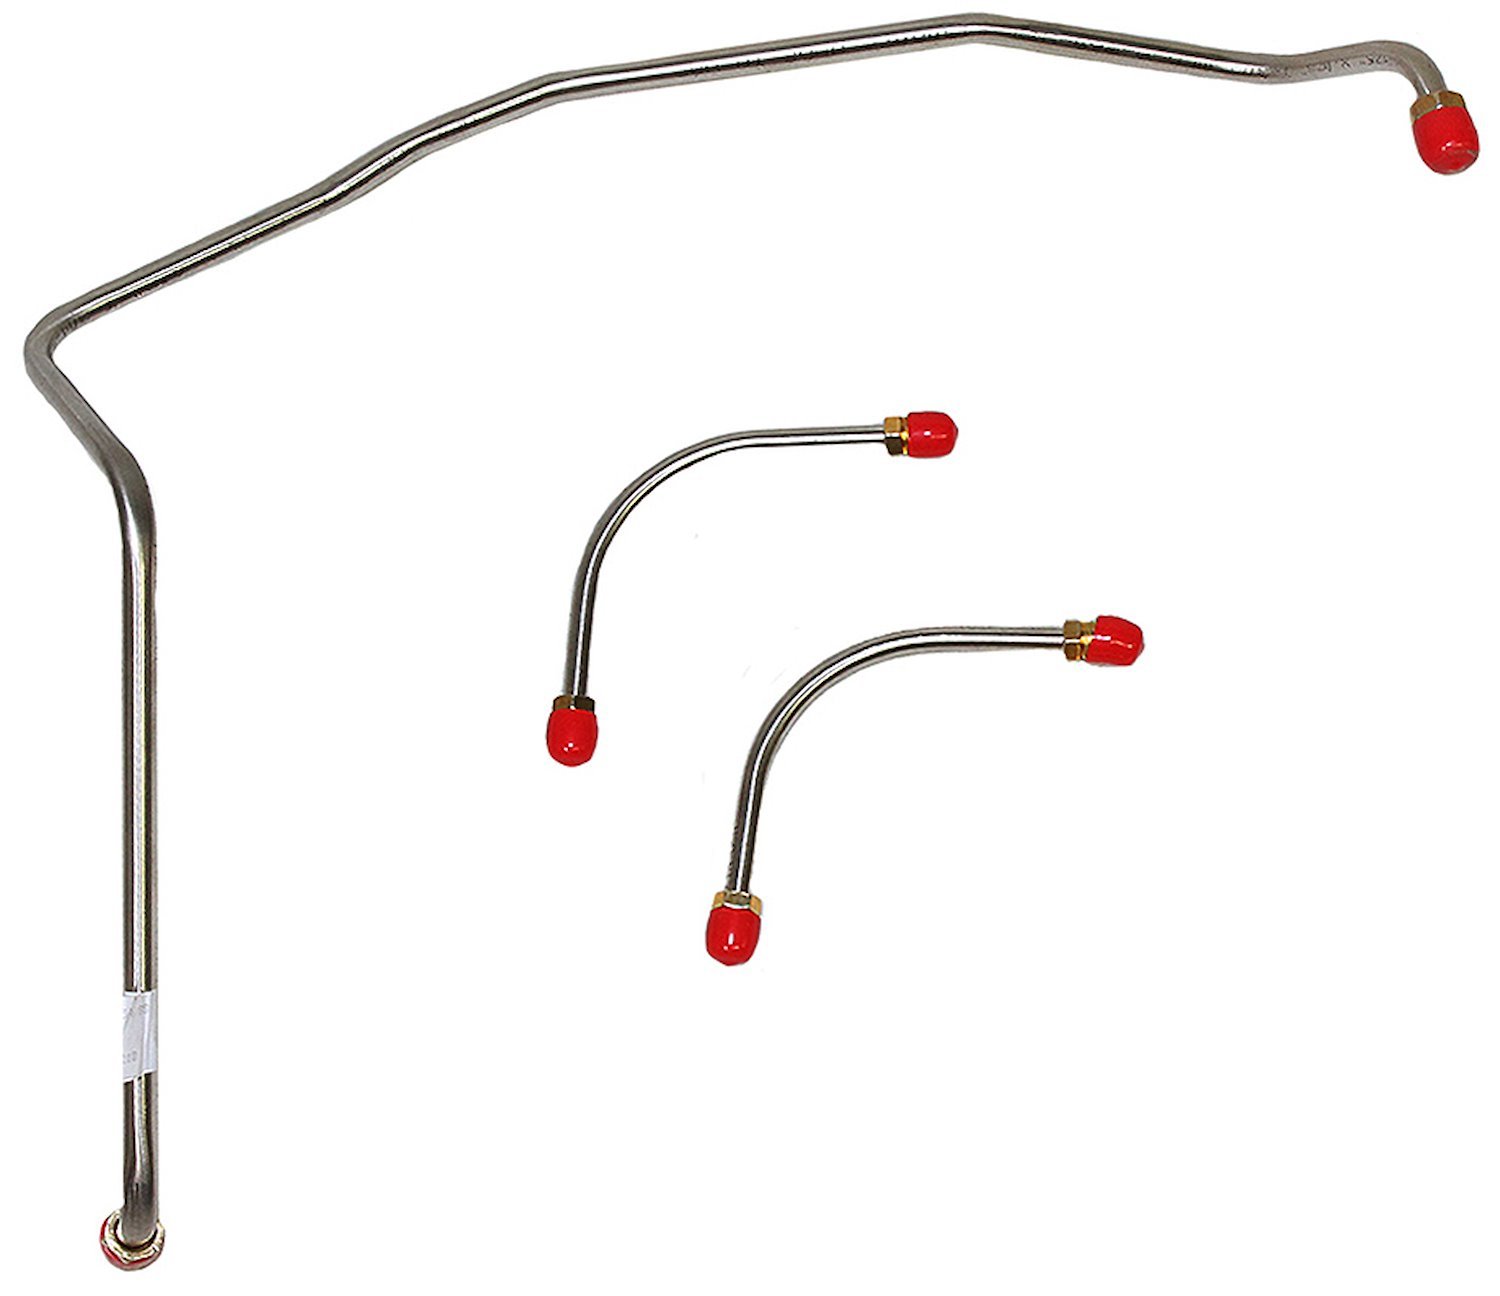 Fuel Line Kit, Fuel Pump to Carburetor for Select 1969 Chevy Camaro, Nova with 396 Engine 375 HP [Stainless Steel]